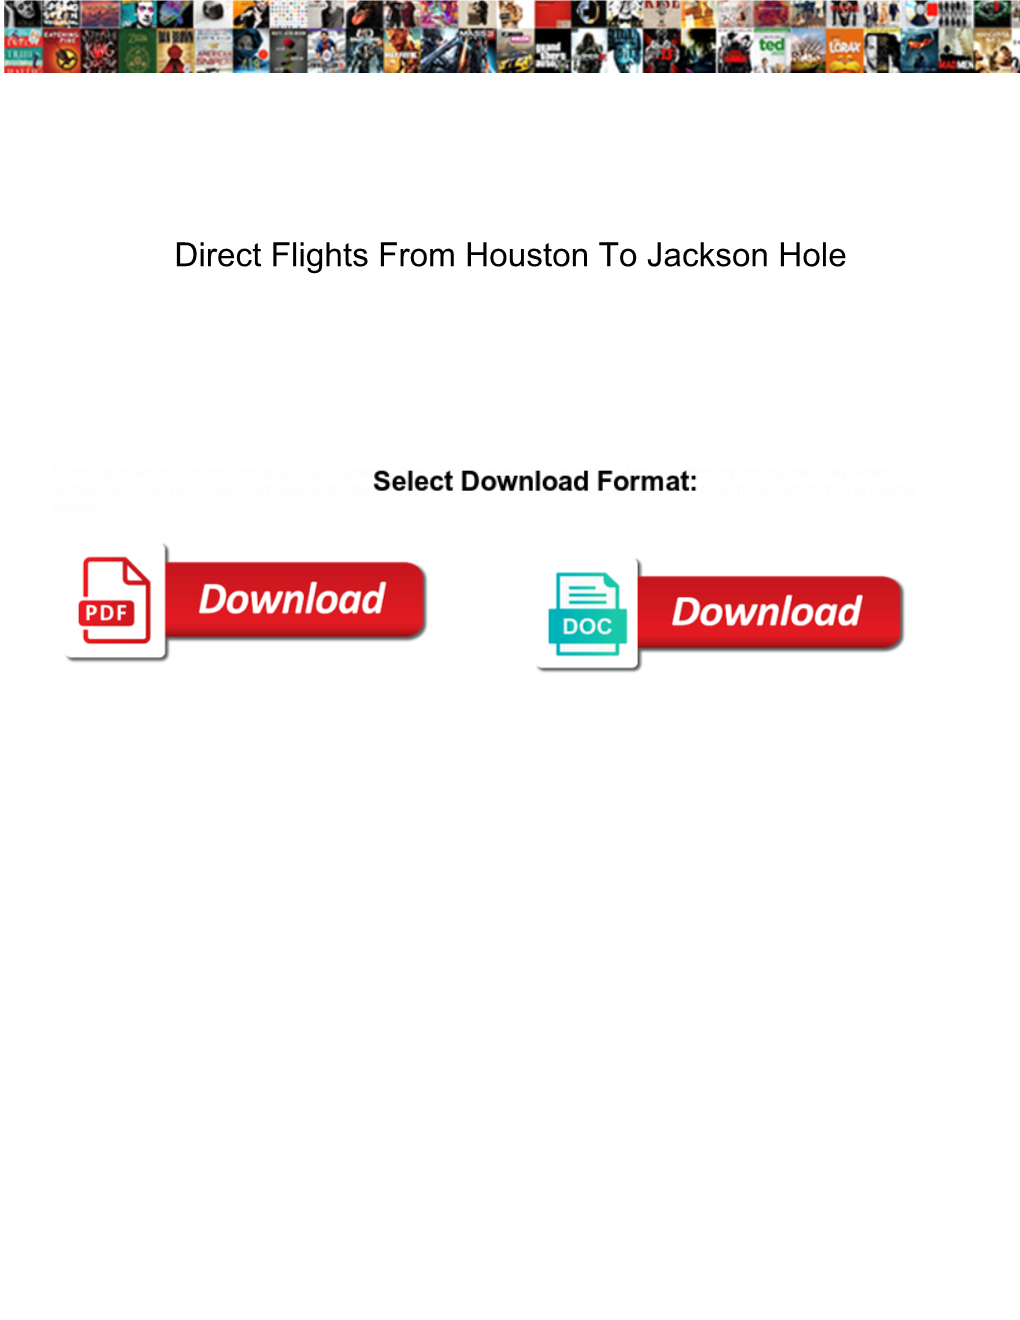 Direct Flights from Houston to Jackson Hole